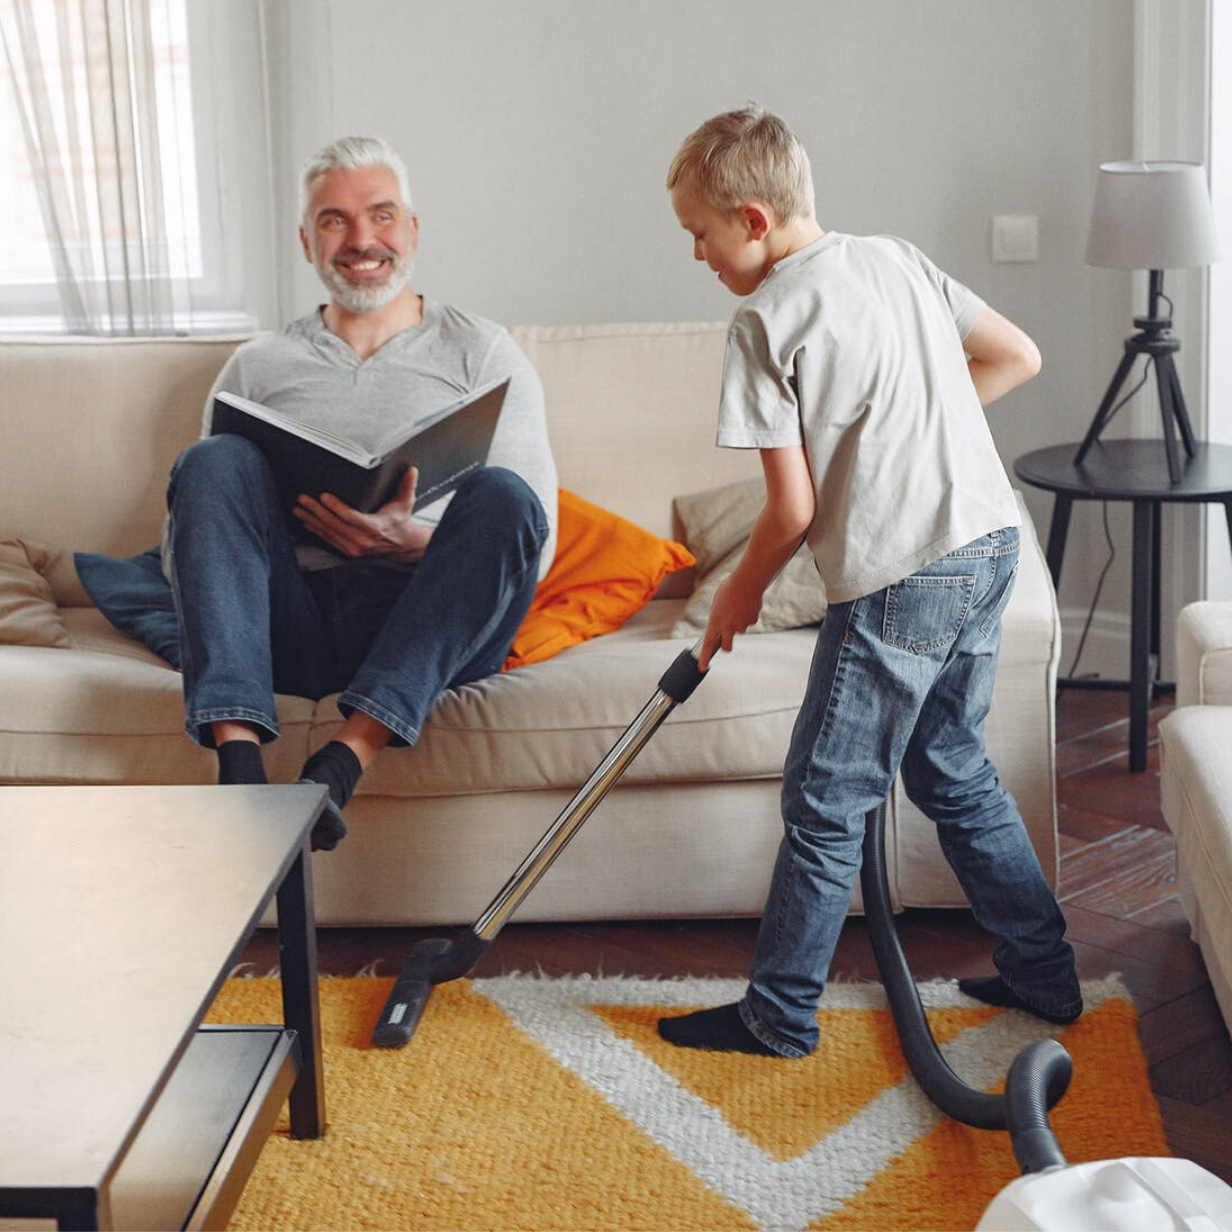 7 Ways to Keep your Kids Active + Engaged at Home